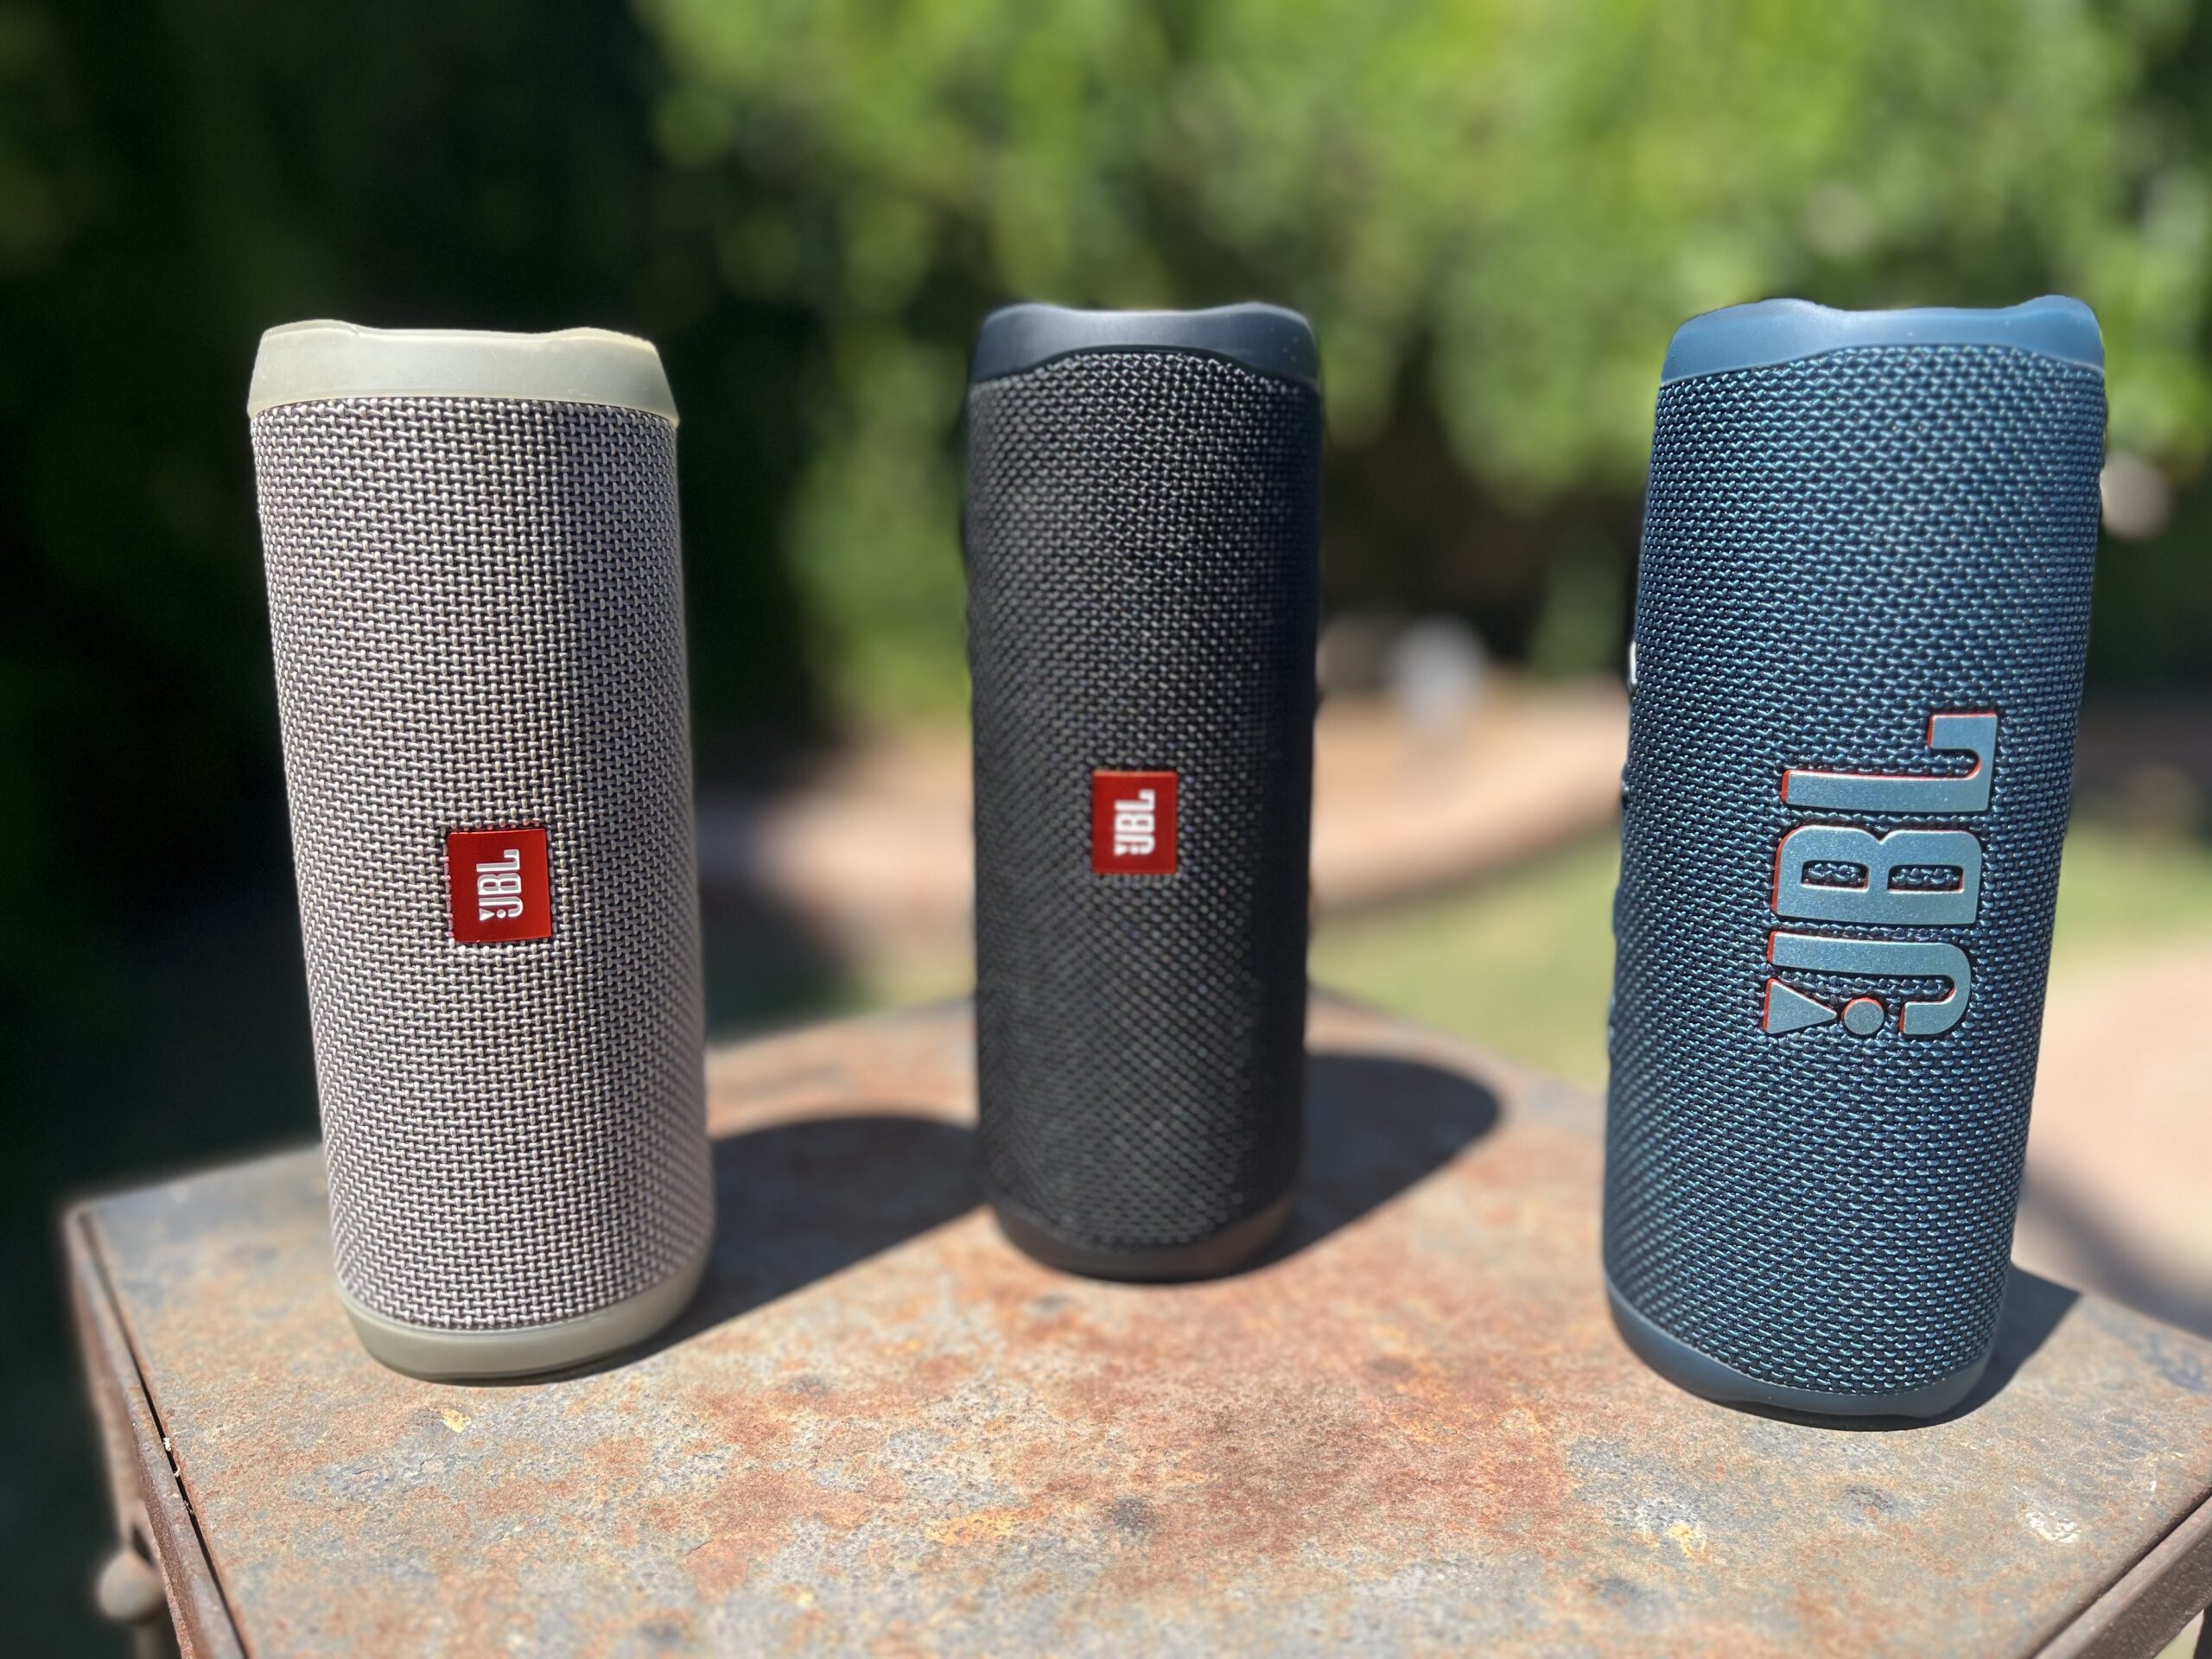 JBL Flip 6 Bluetooth Speaker Review: Ready for adventure - Reviewed